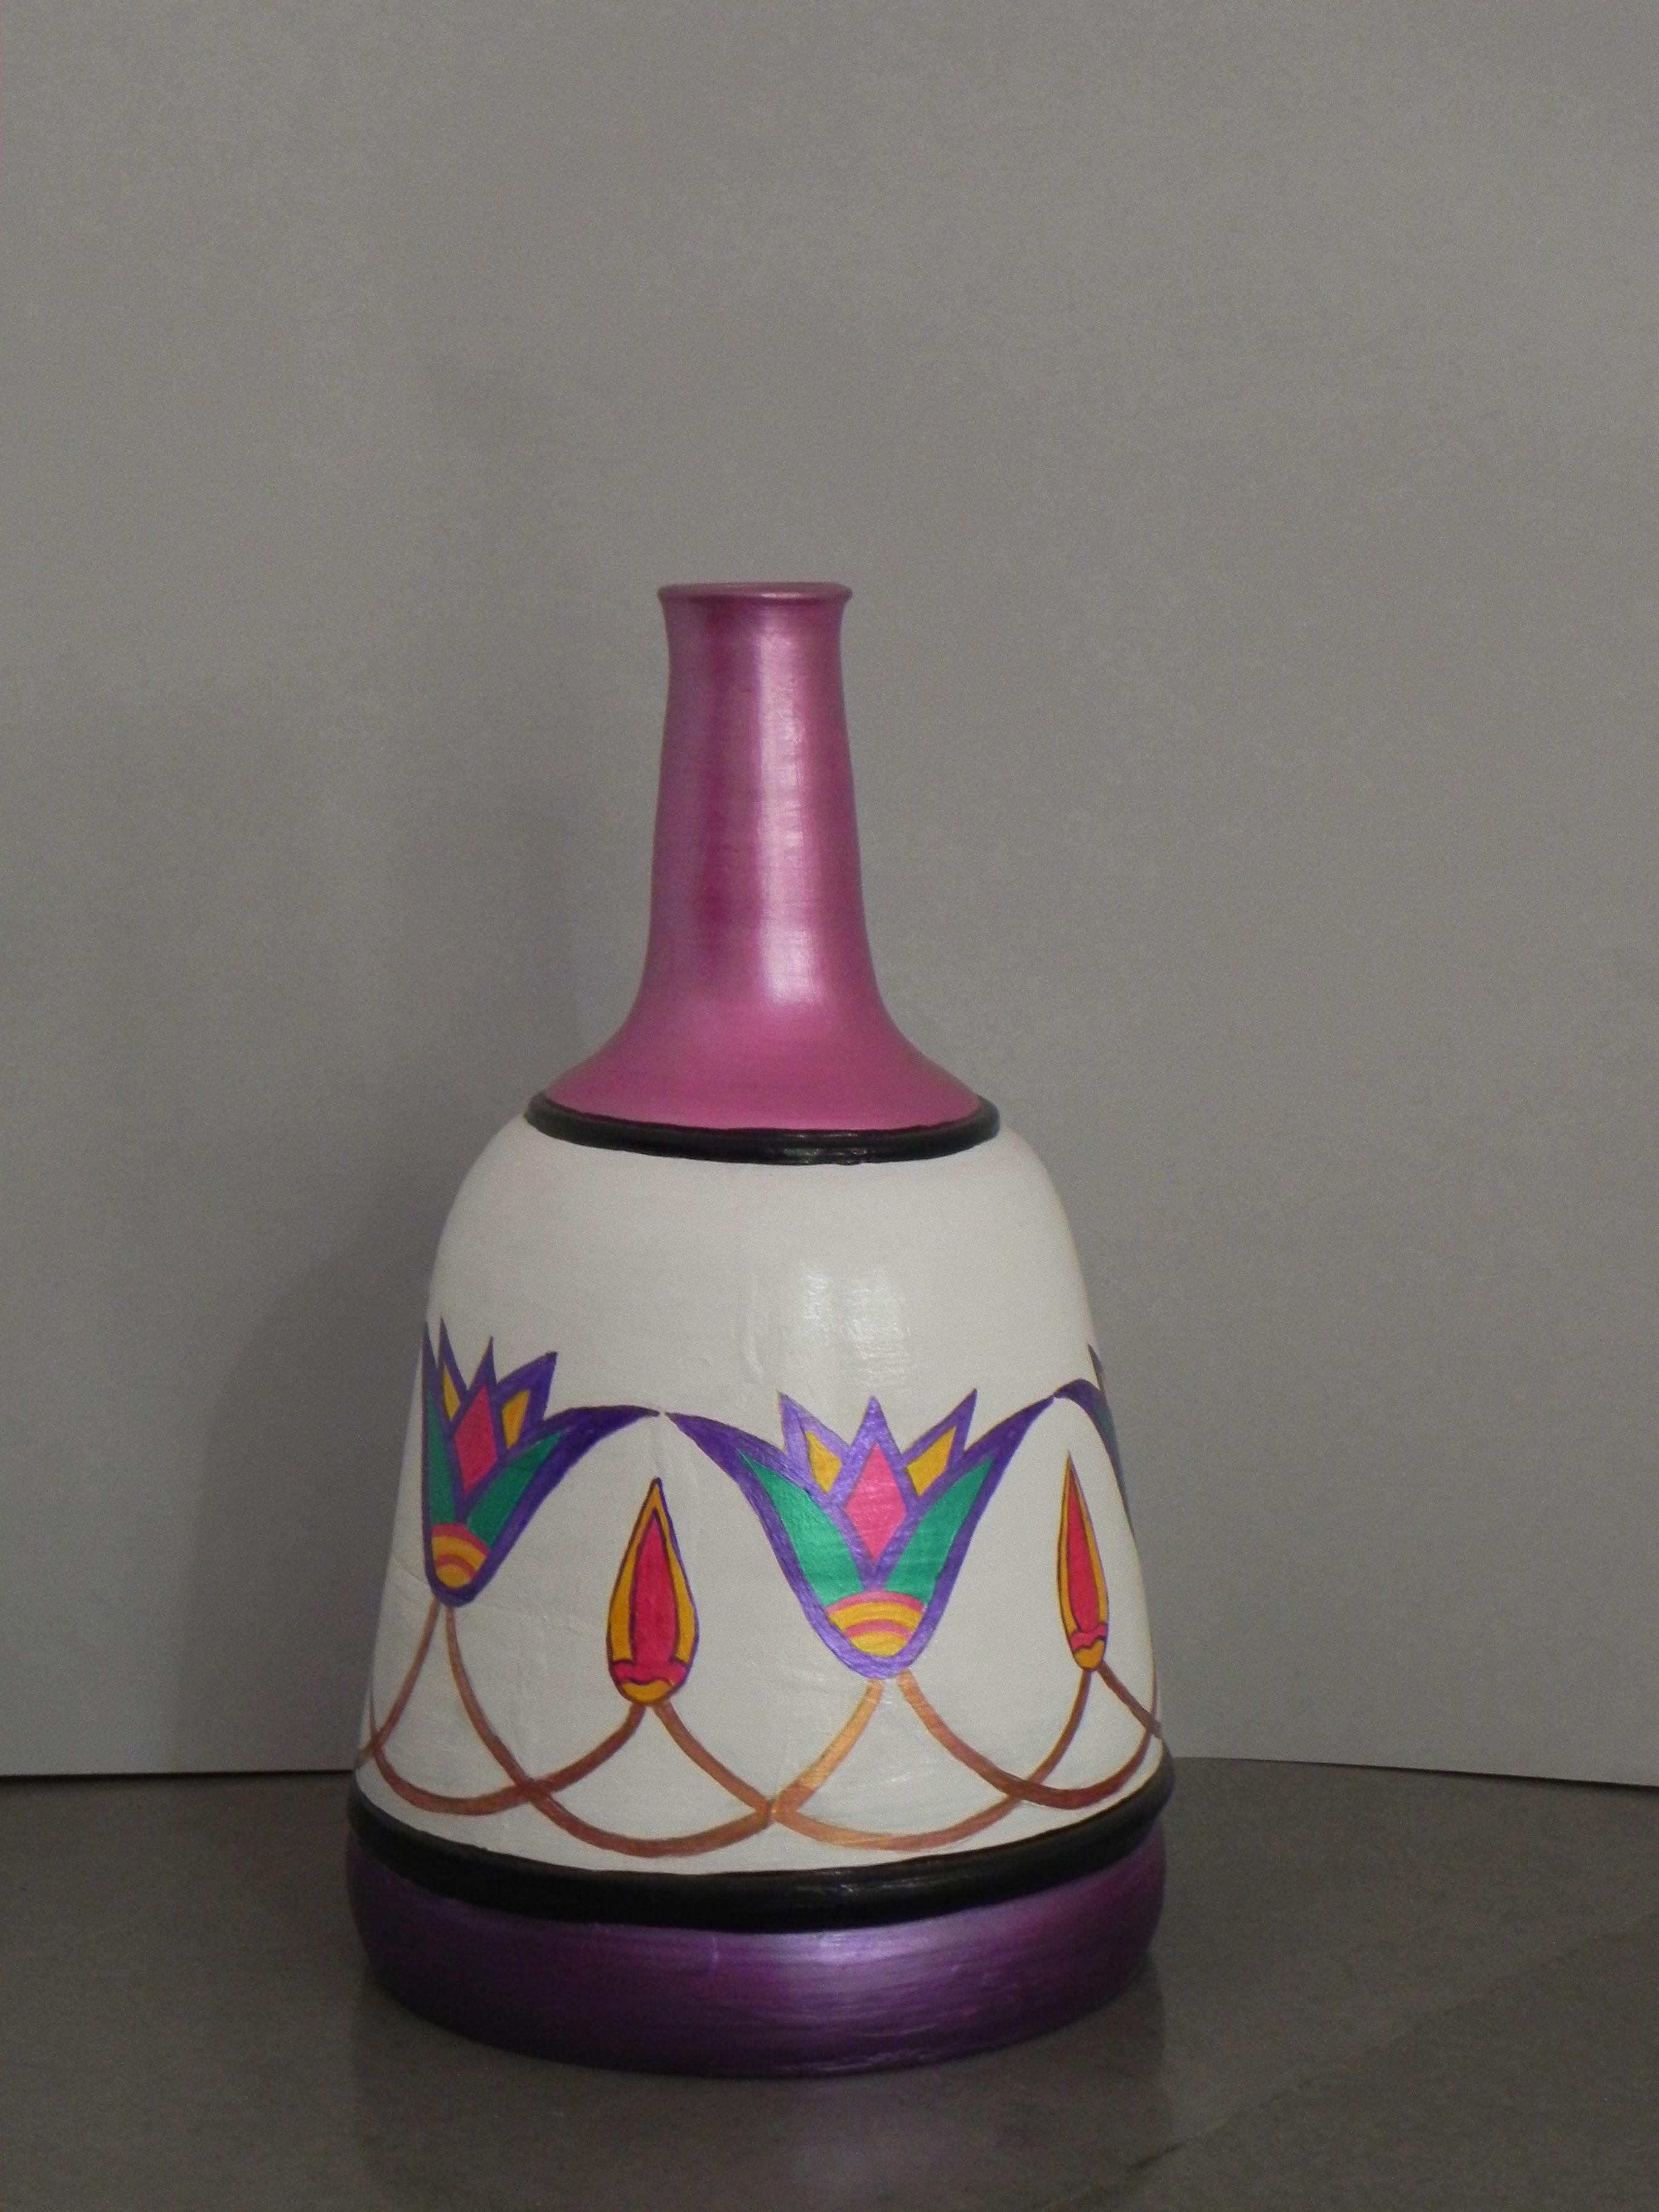 13 attractive Three Hands Vase 2024 free download three hands vase of egyptian style pot floral design in egyptian style white background intended for egyptian style pot floral design in egyptian style white background pink neck violet bott